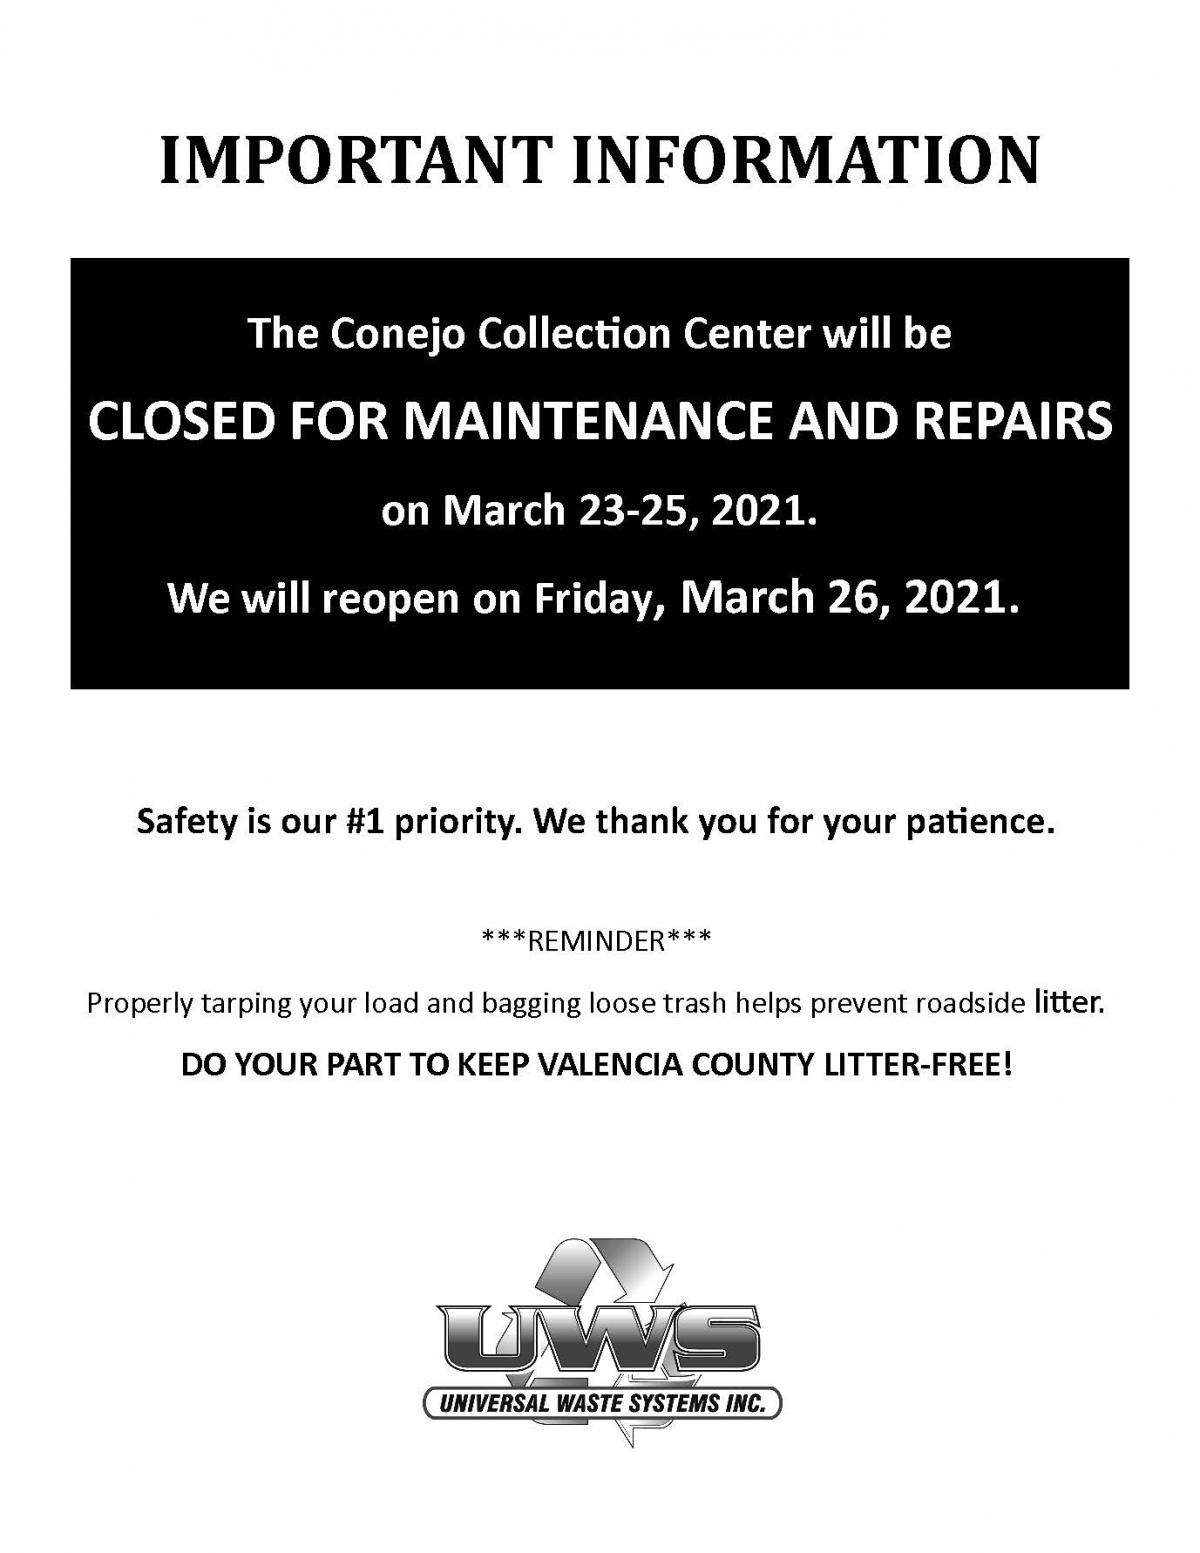 Conejo Collection Center closed for Maintenance and repairs 3/23-3/25 